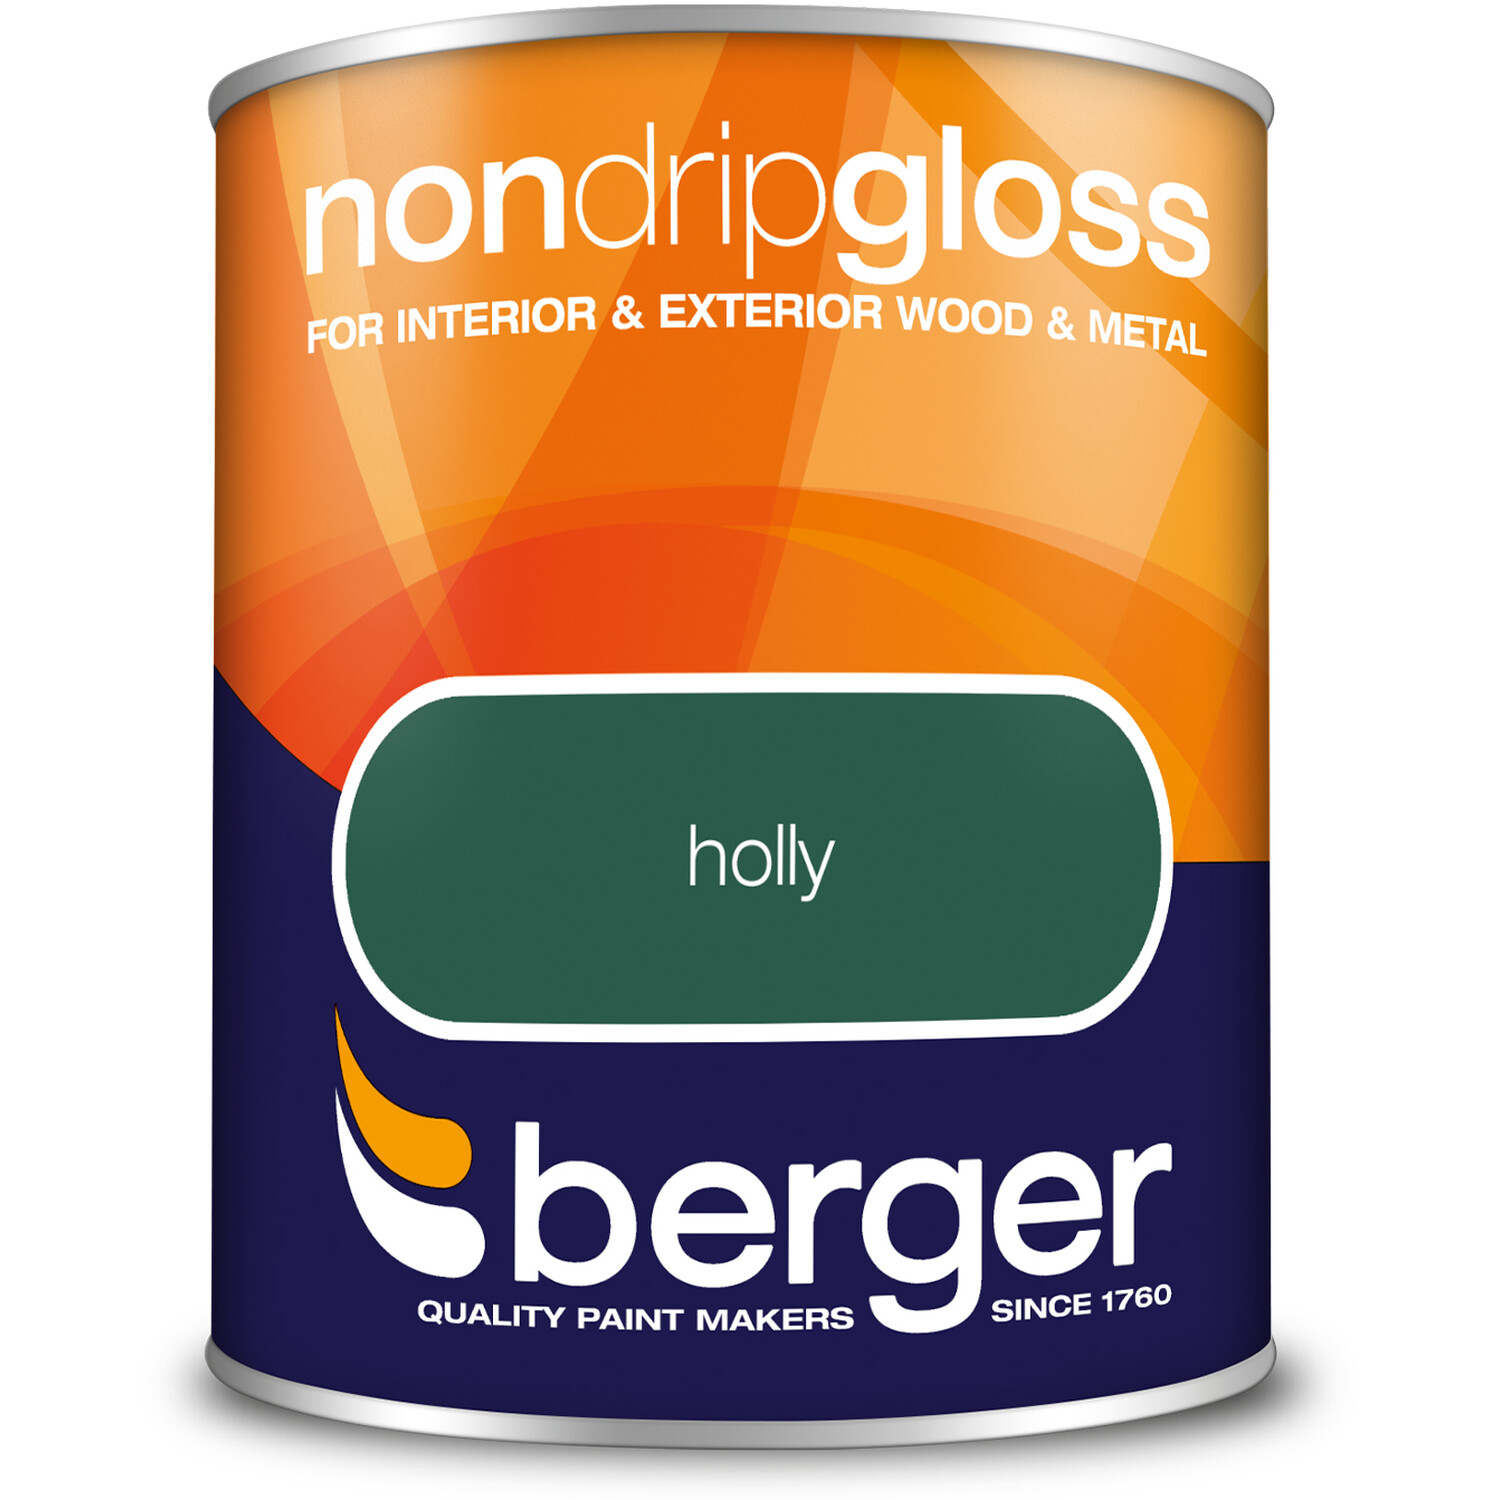 Berger Wood and Metal Holly Non Drip Gloss Paint 750ml Image 2